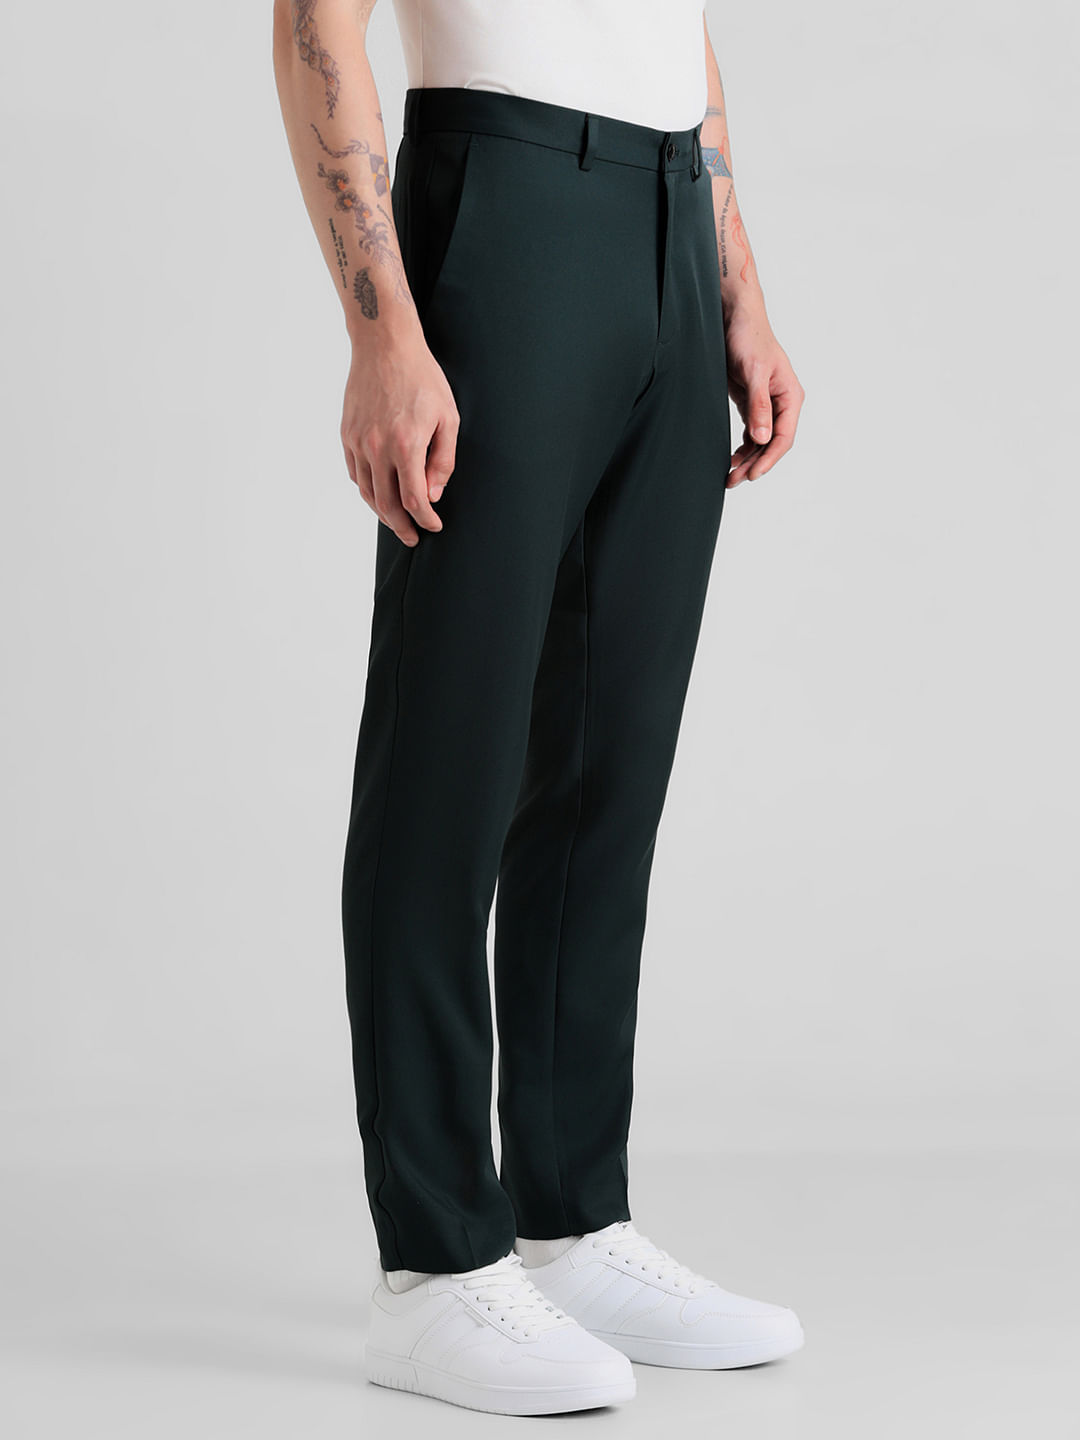 Buy FAANI Women's Cotton Blend Slim Fit Casual Trousers Online In India At  Discounted Prices